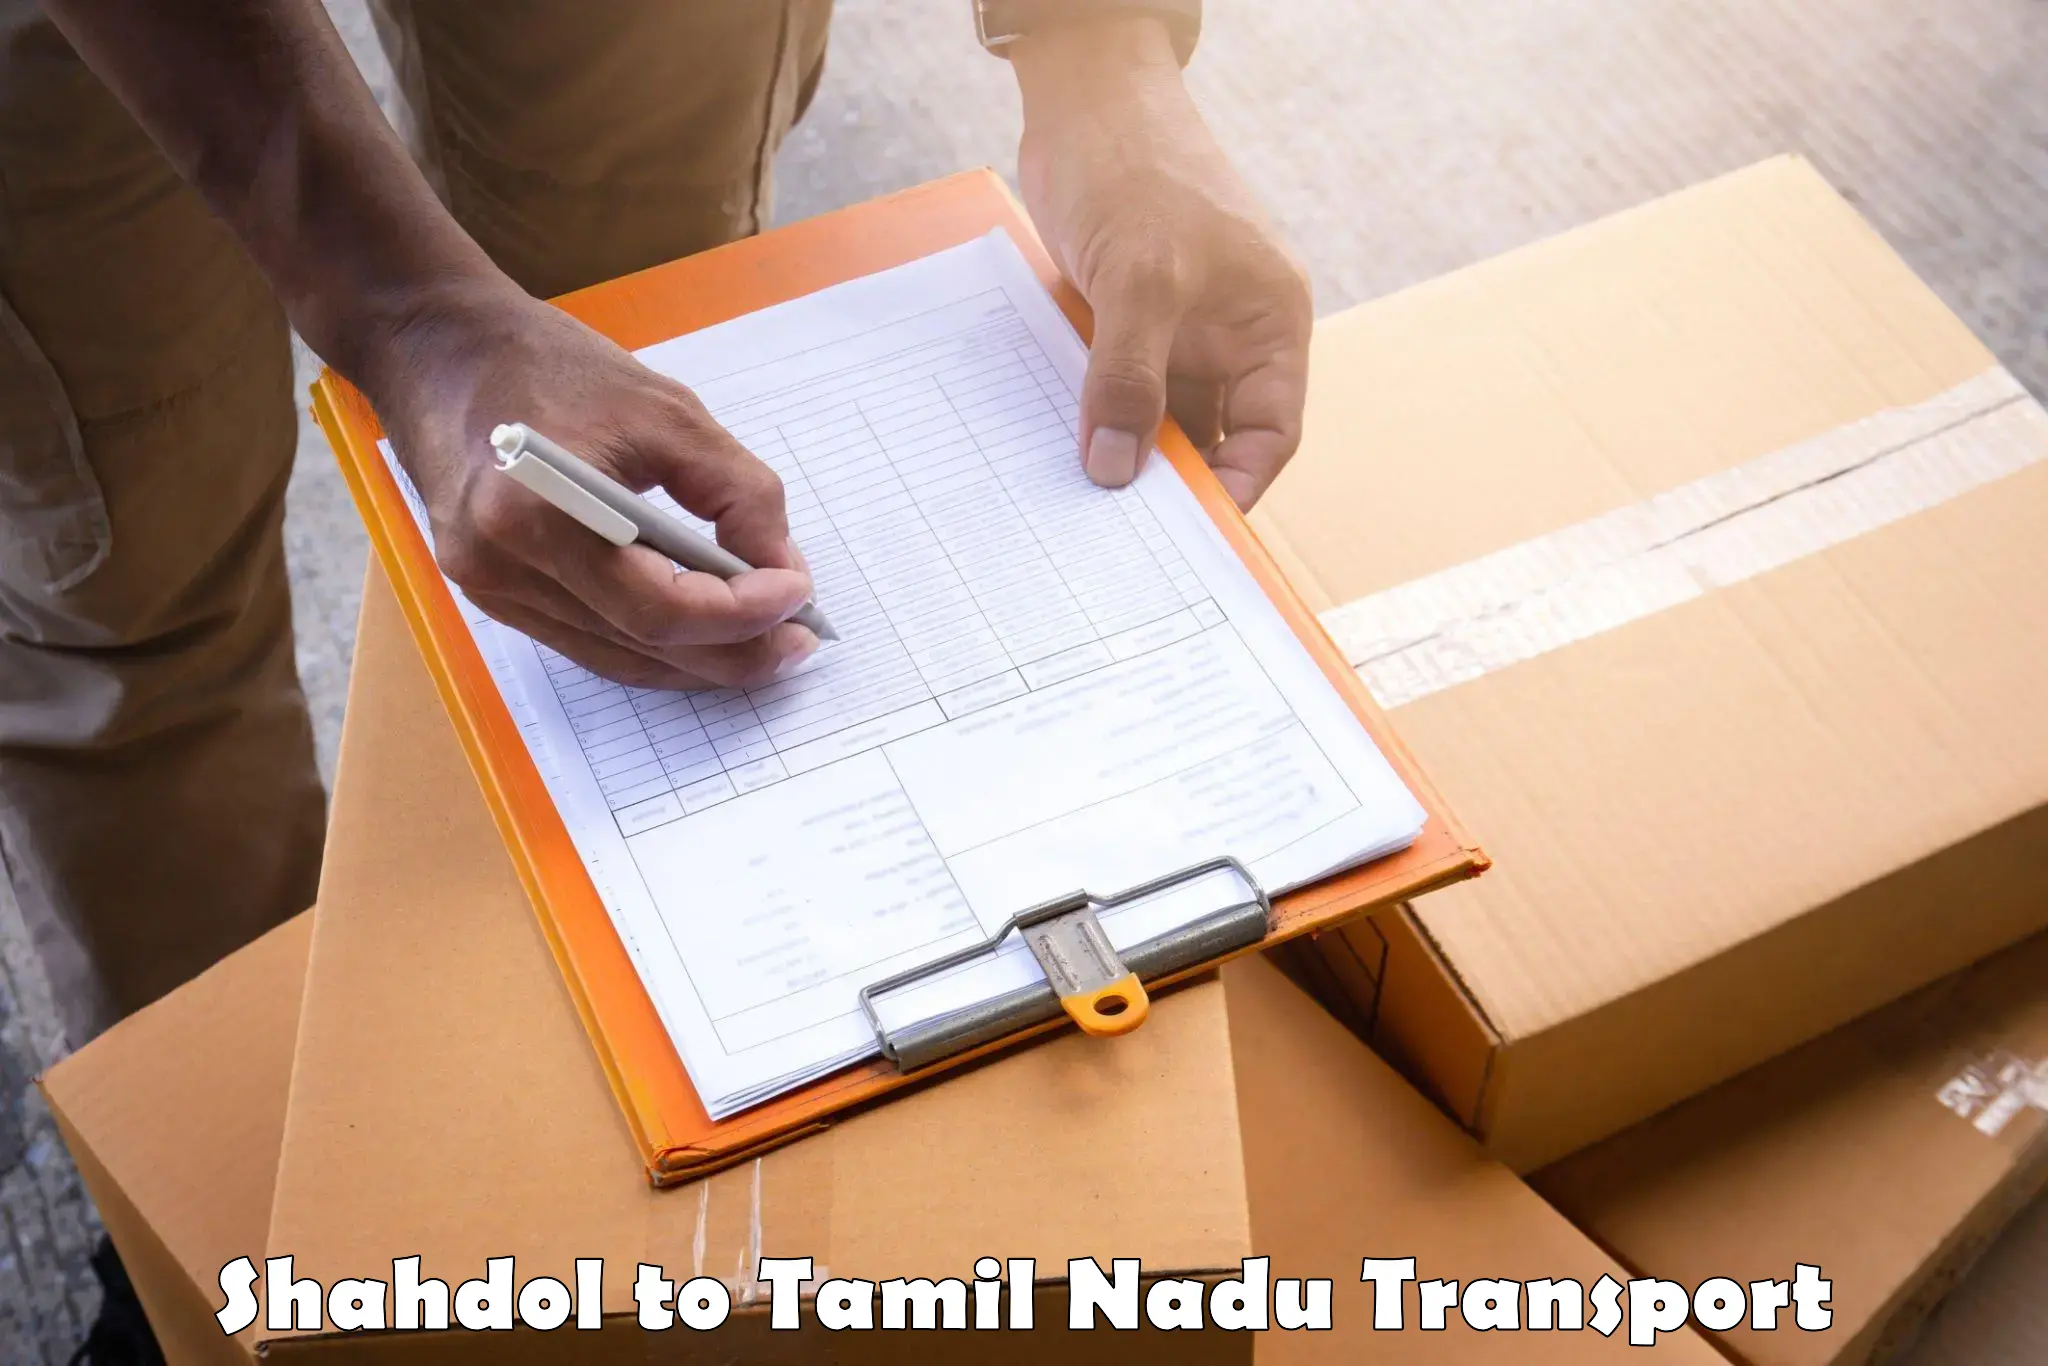 Two wheeler parcel service Shahdol to Ennore Port Chennai